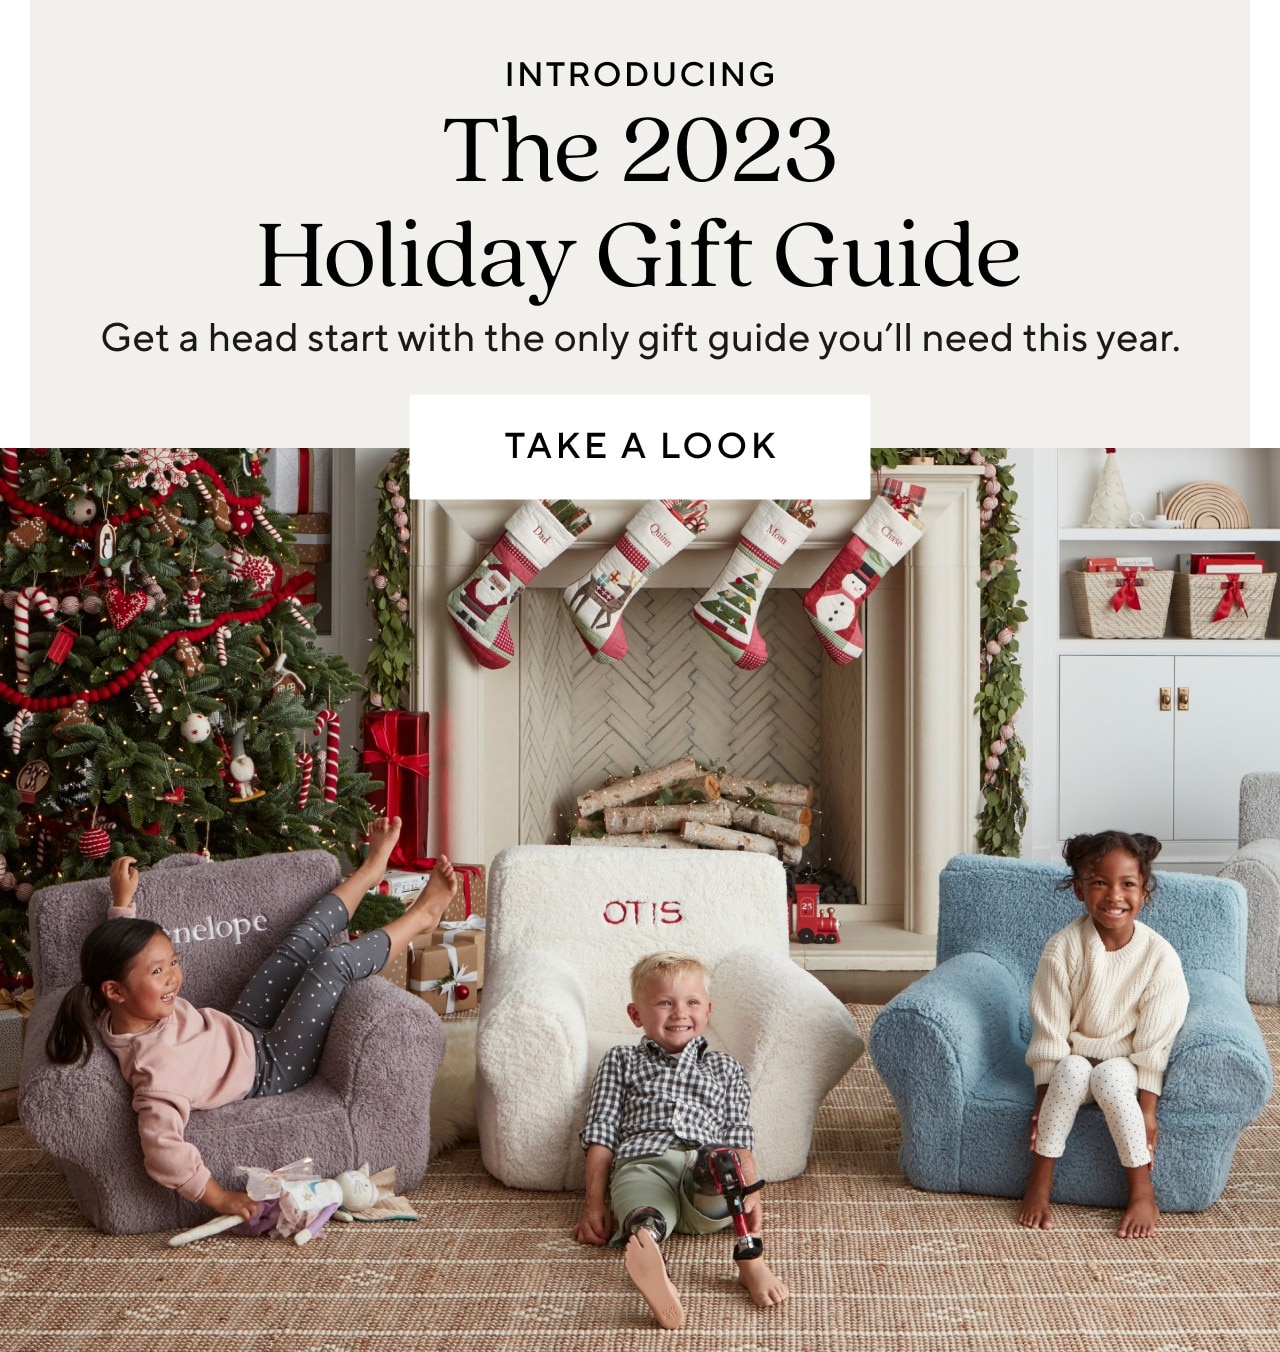 INTRODUCING THE 2023 HOLIDAY GIFT GUIDE